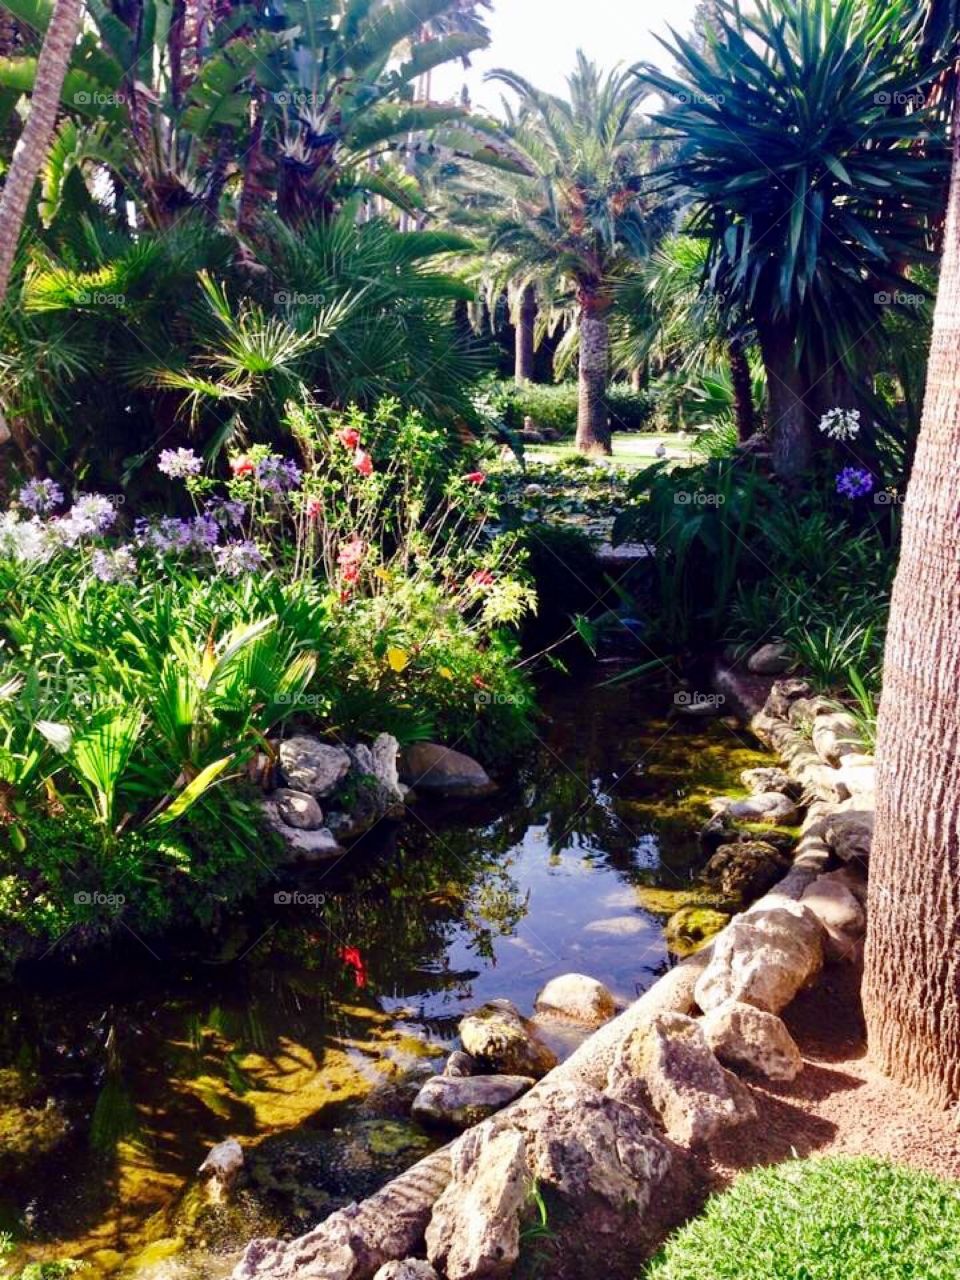 Paradise in marbella, a windy river amongst foliage and flowers 